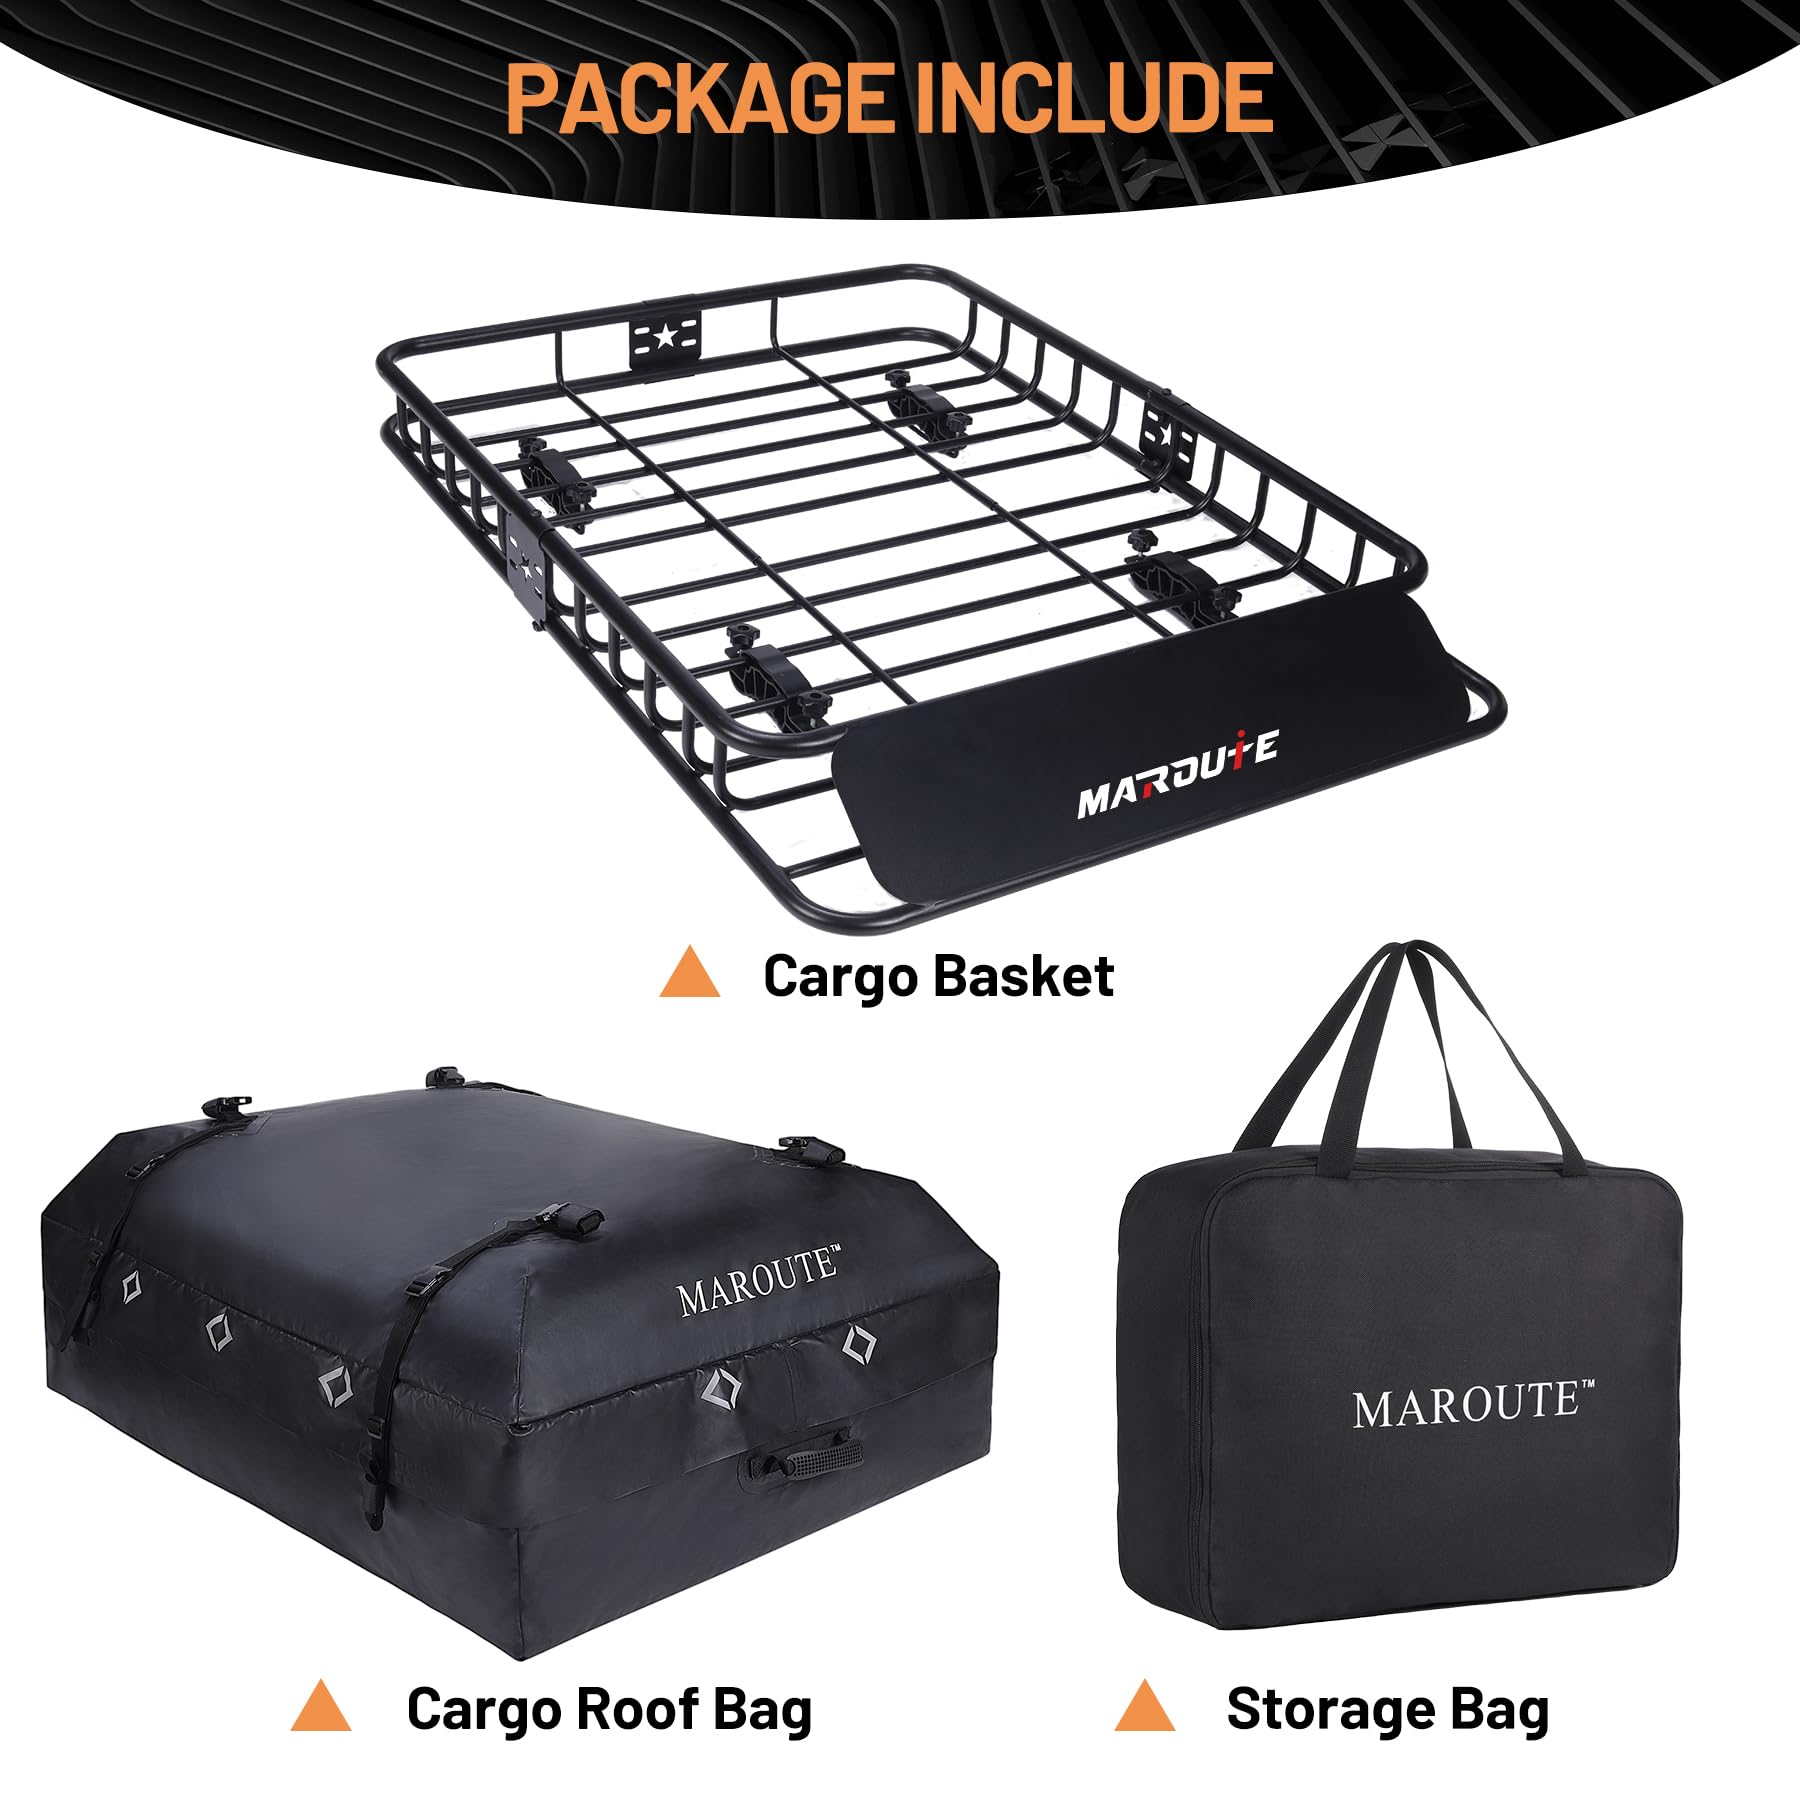 Universal Cargo Carrier Basket 51 x 36 Inch Rooftop Cargo Carrier Basket,200LBS Weight Capacity Car Luggage Holder for SUV,Trucks&Cars (Cargo Rack with Cargo Bag)